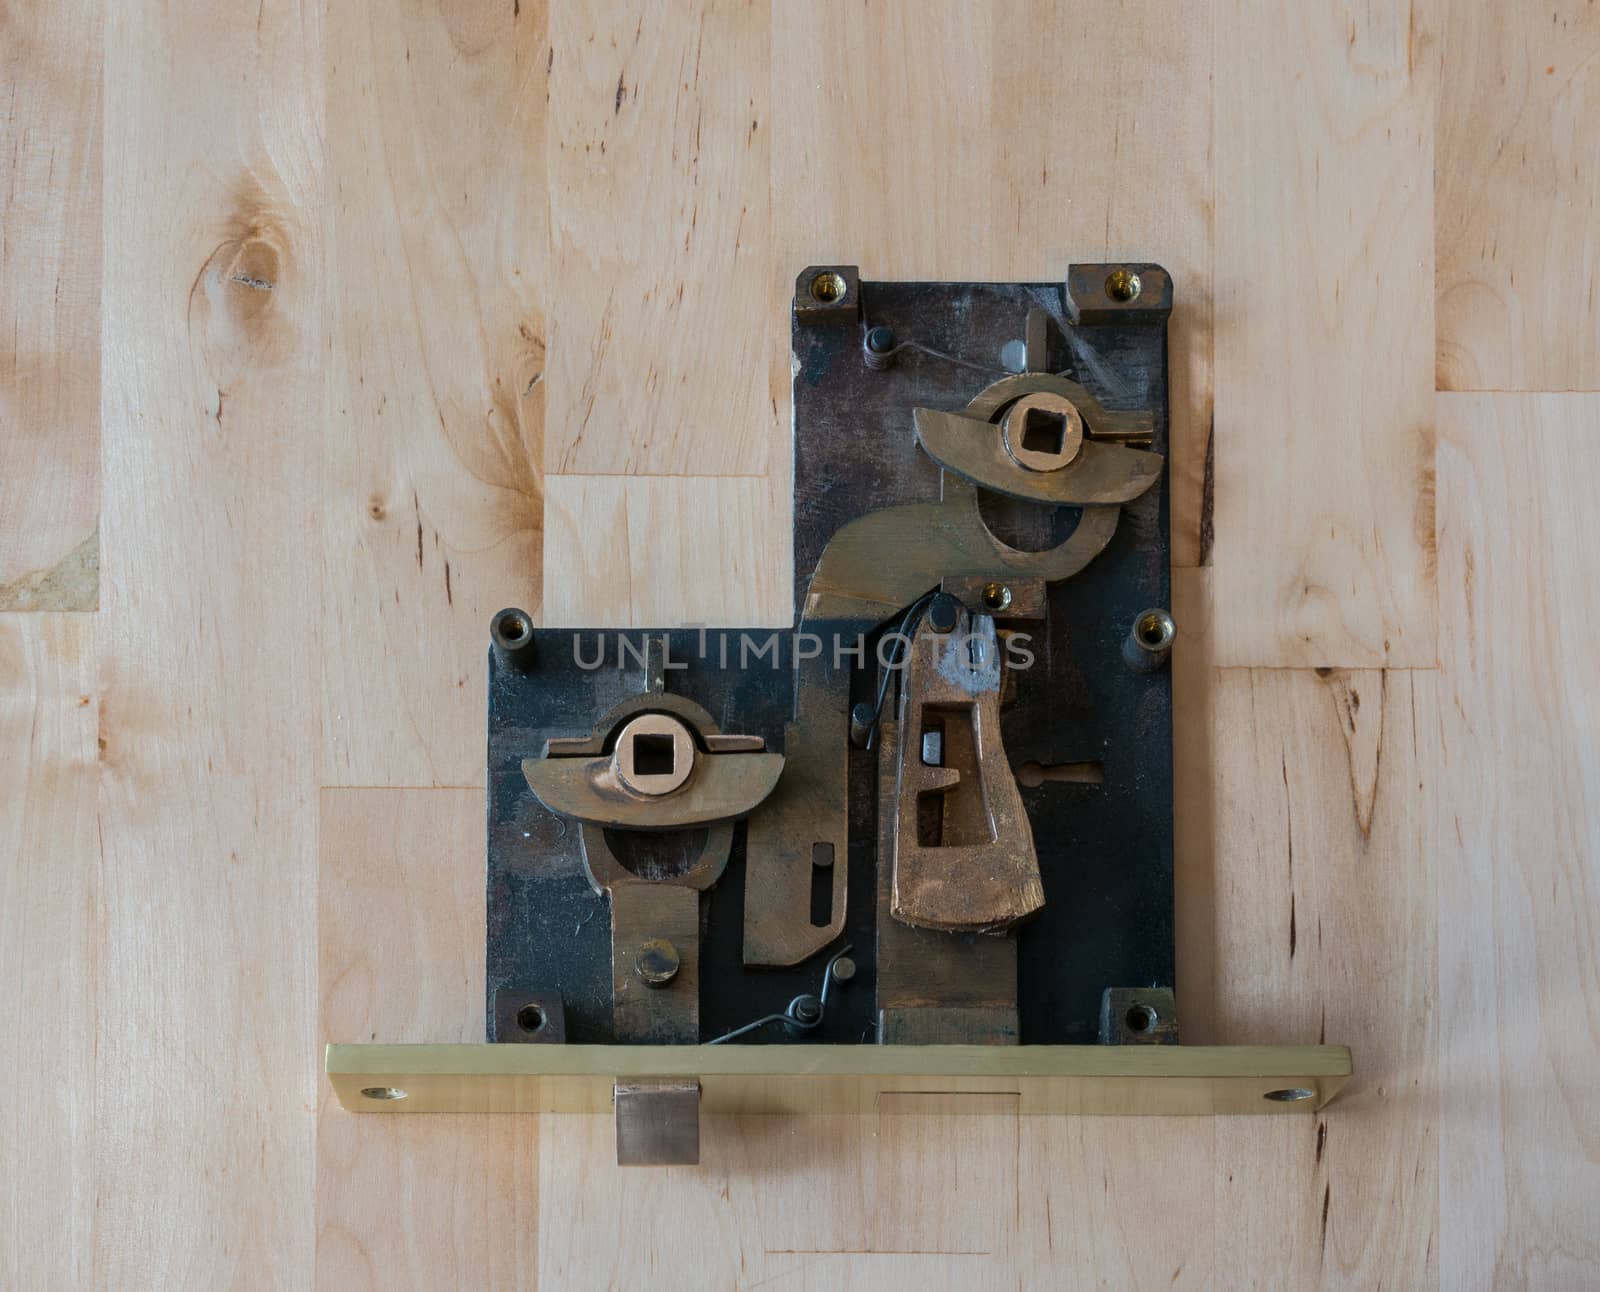 Inside view at opened old brass lock on the wooden table